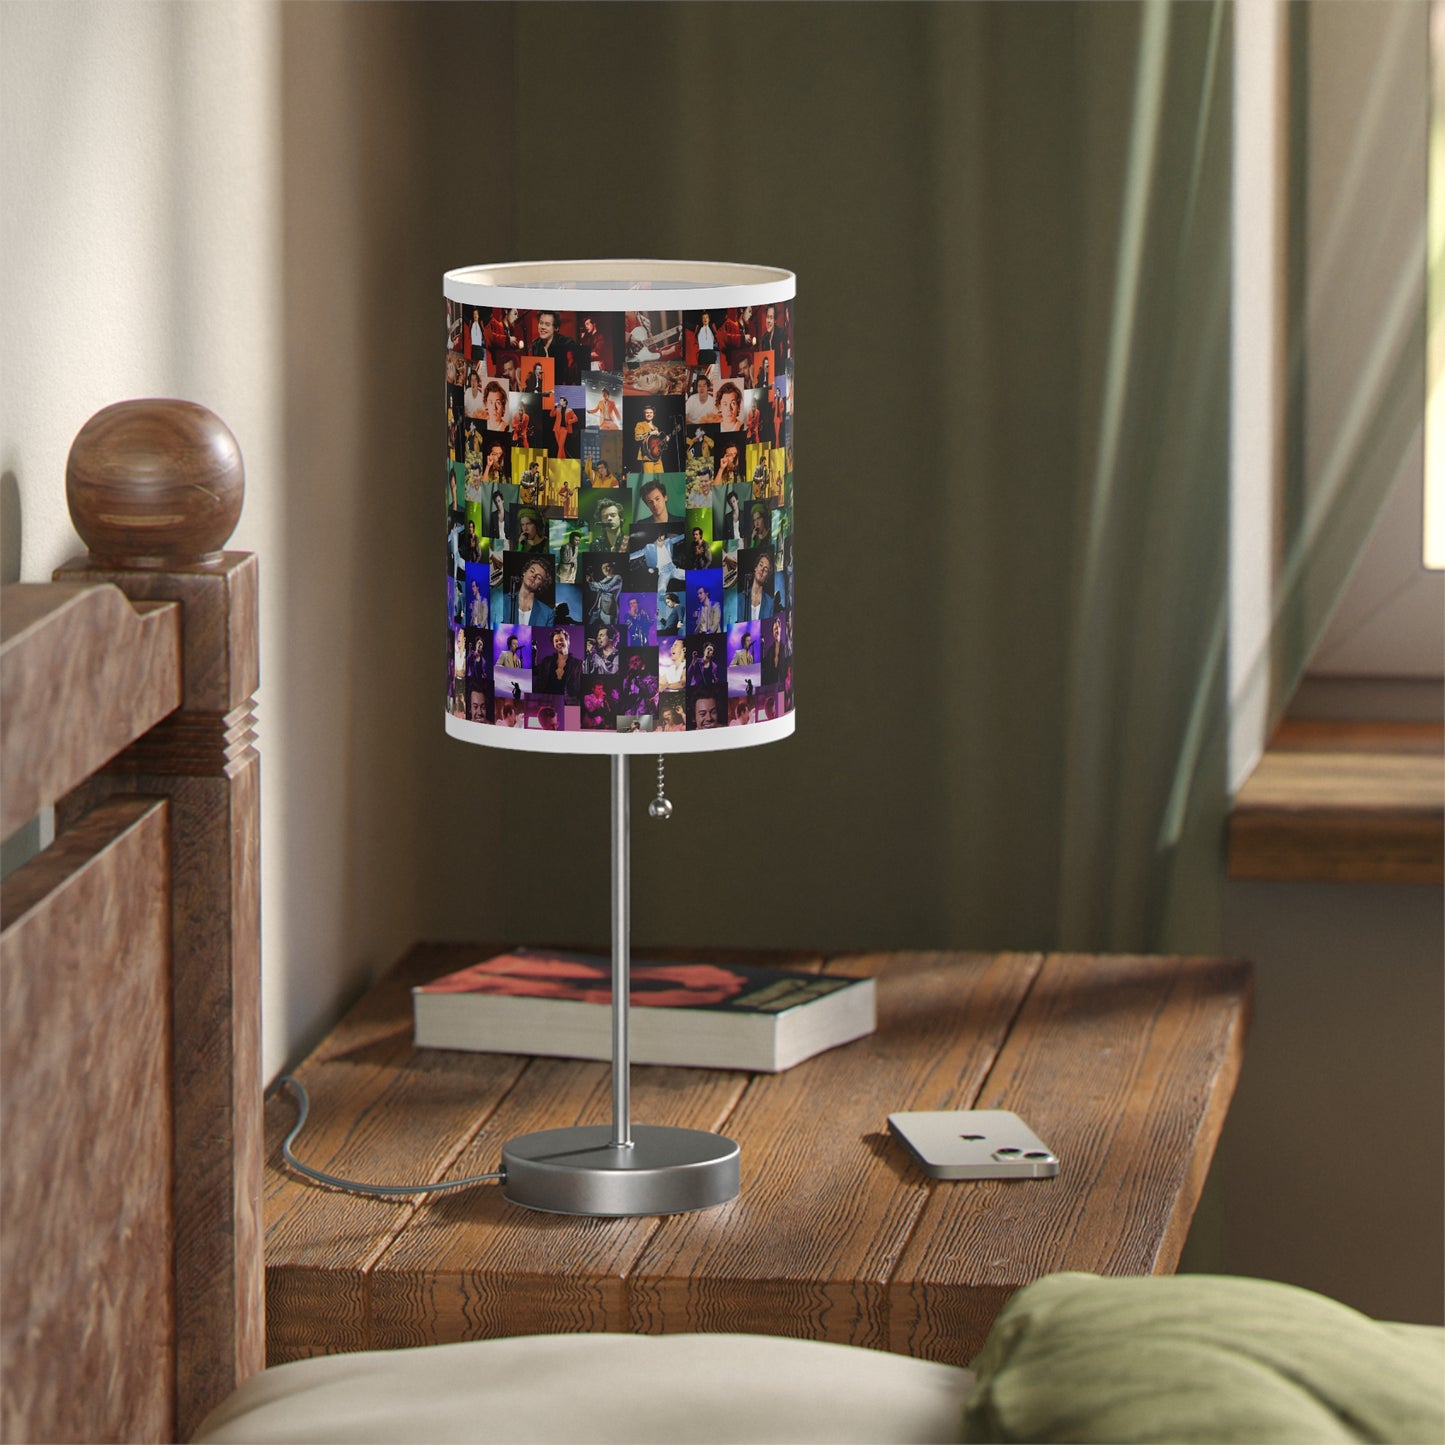 Harry Styles Rainbow Photo Collage Lamp on a Stand